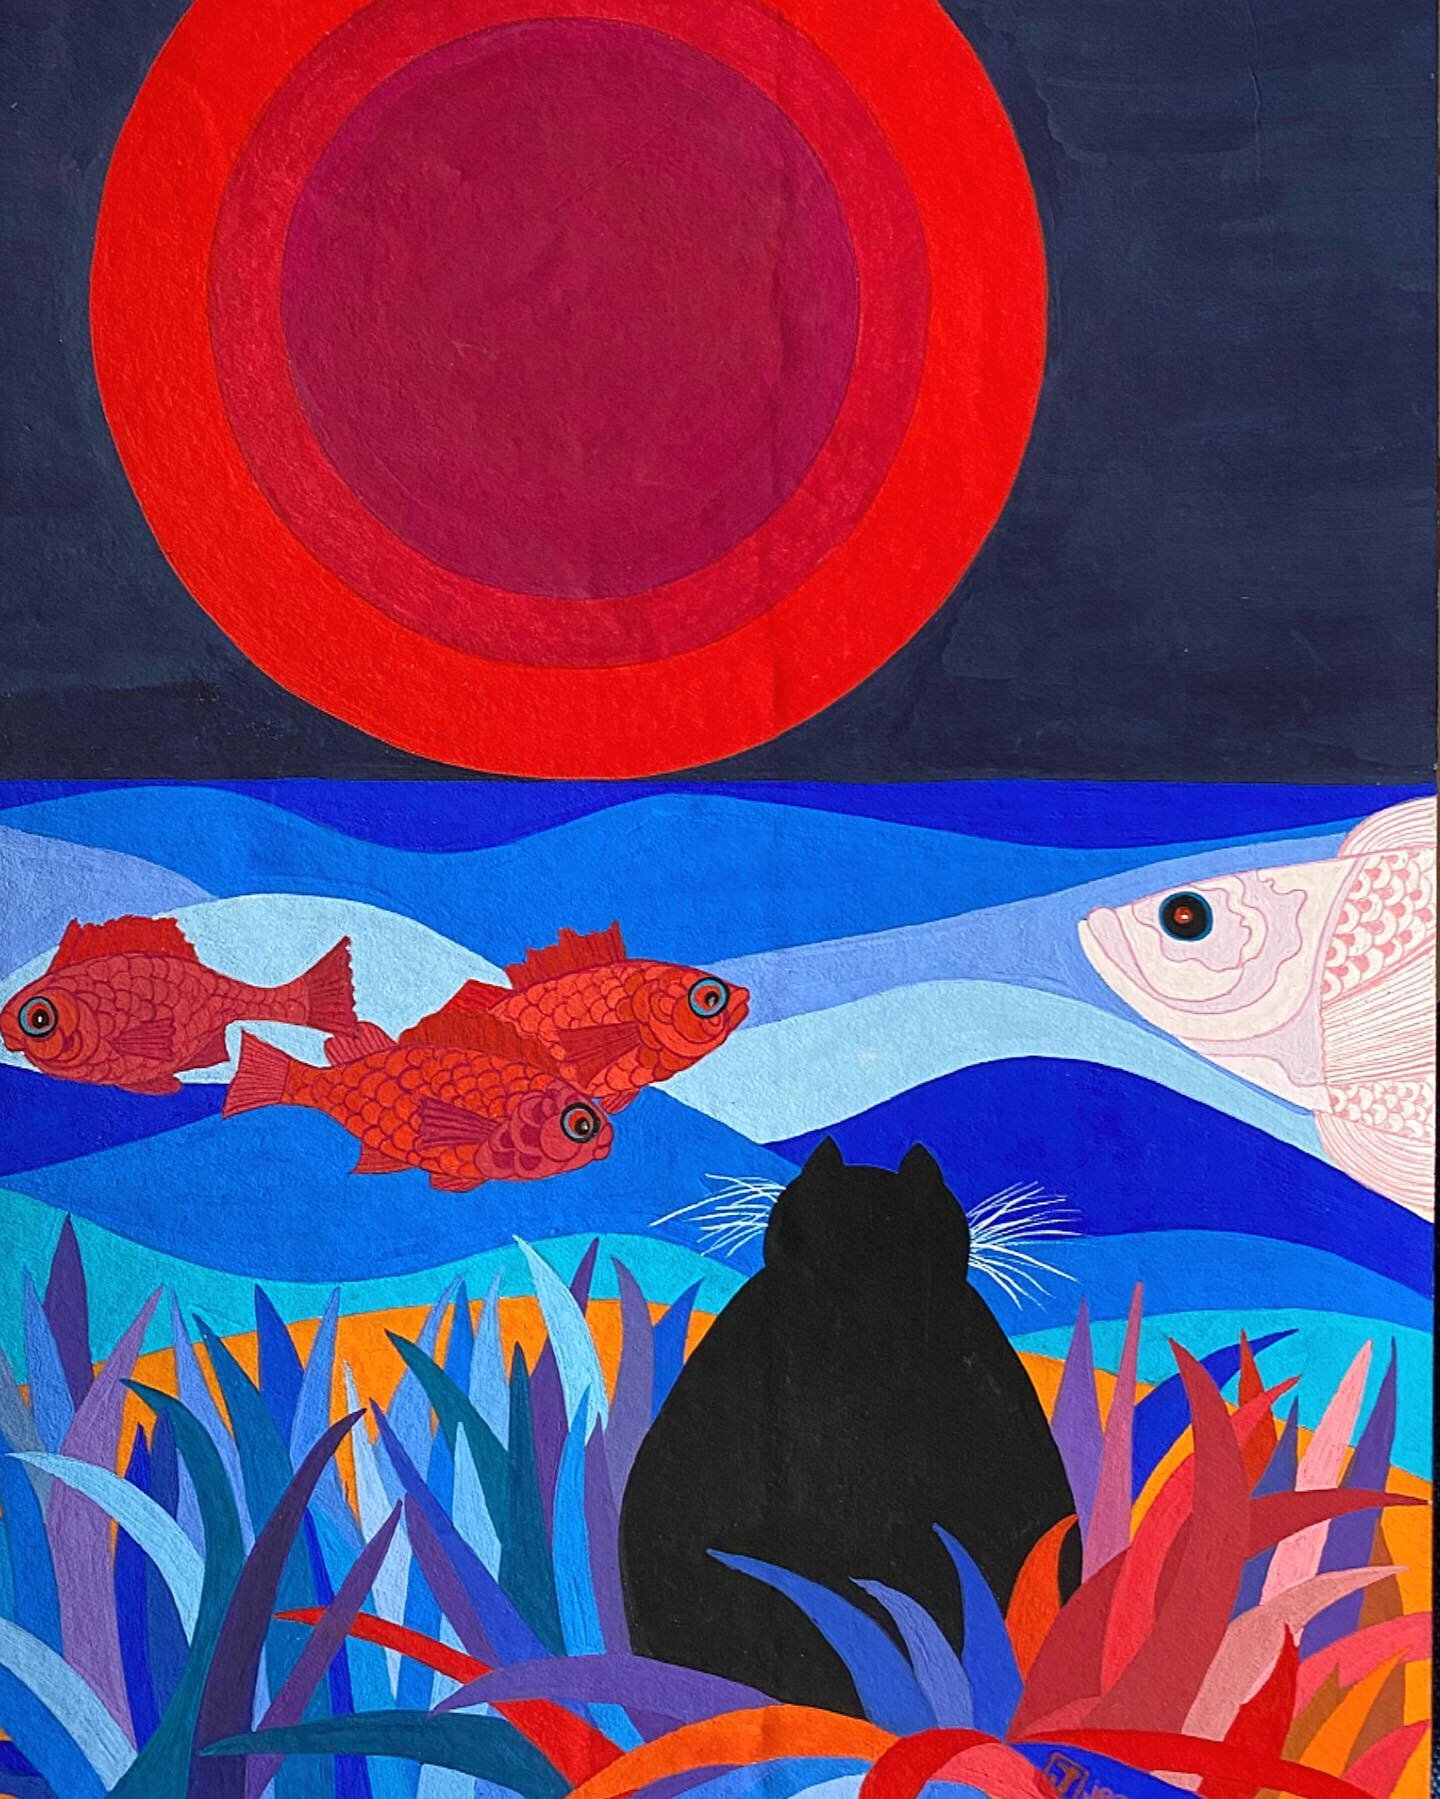 Here is Jean&rsquo;s finished painting, she wants to call it &ldquo;Supper Time&rdquo;! 😁💙🌊🐟🐈&zwj;⬛😂
Also, if you want to know more about the painting and about inspiration in general you can check out this month&rsquo;s newsletter- you can sig